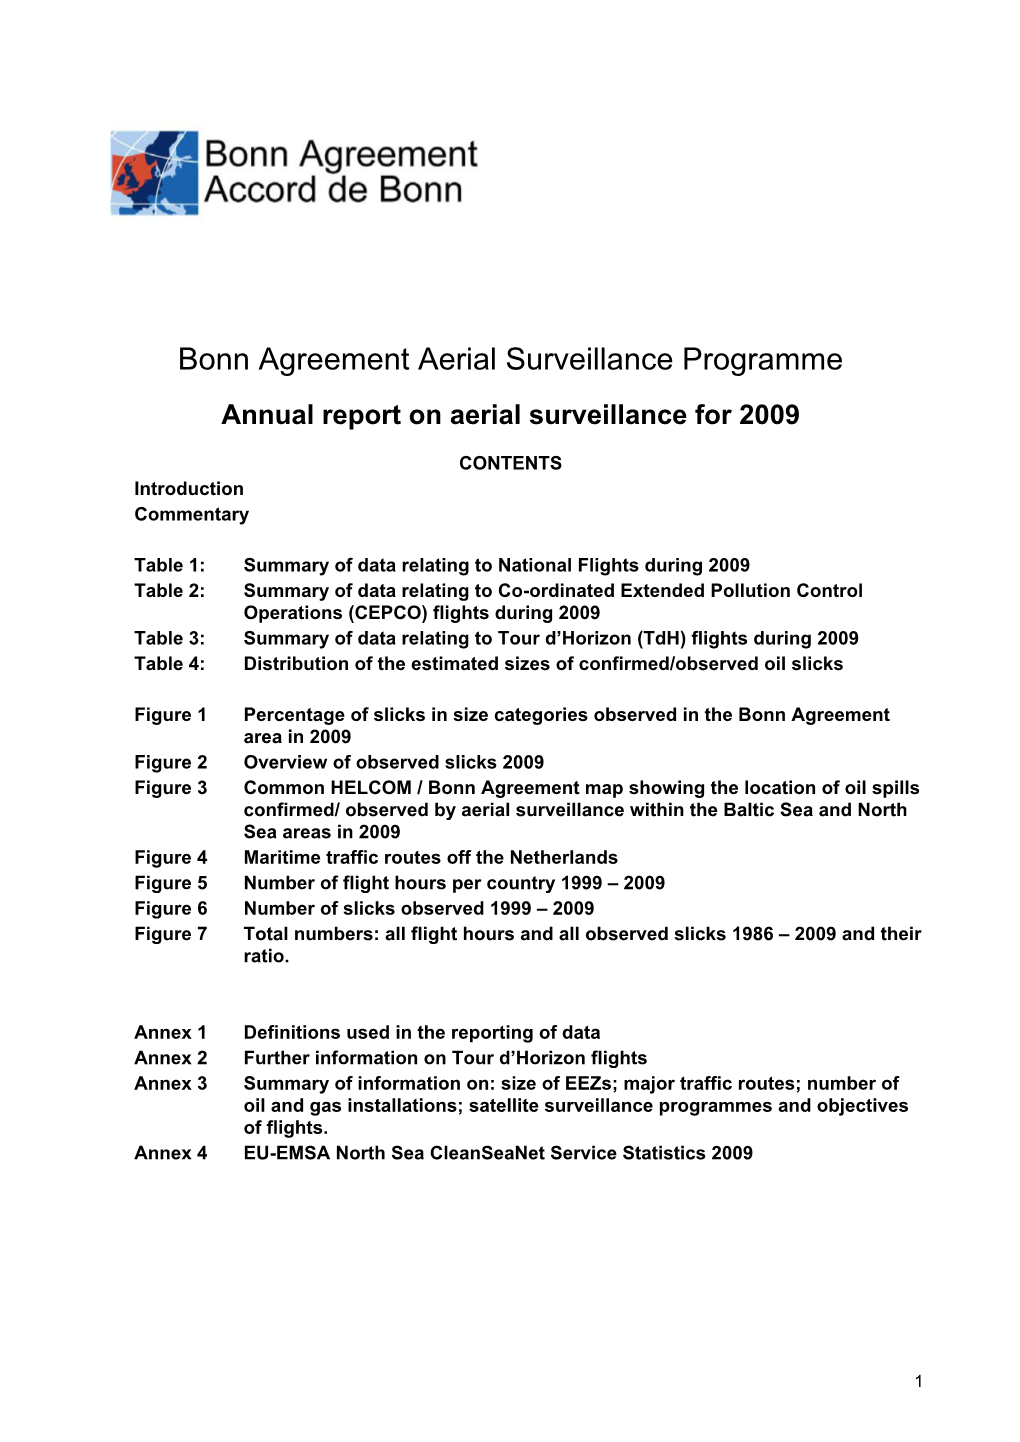 Annual Report on Aerial Surveillance for 2009